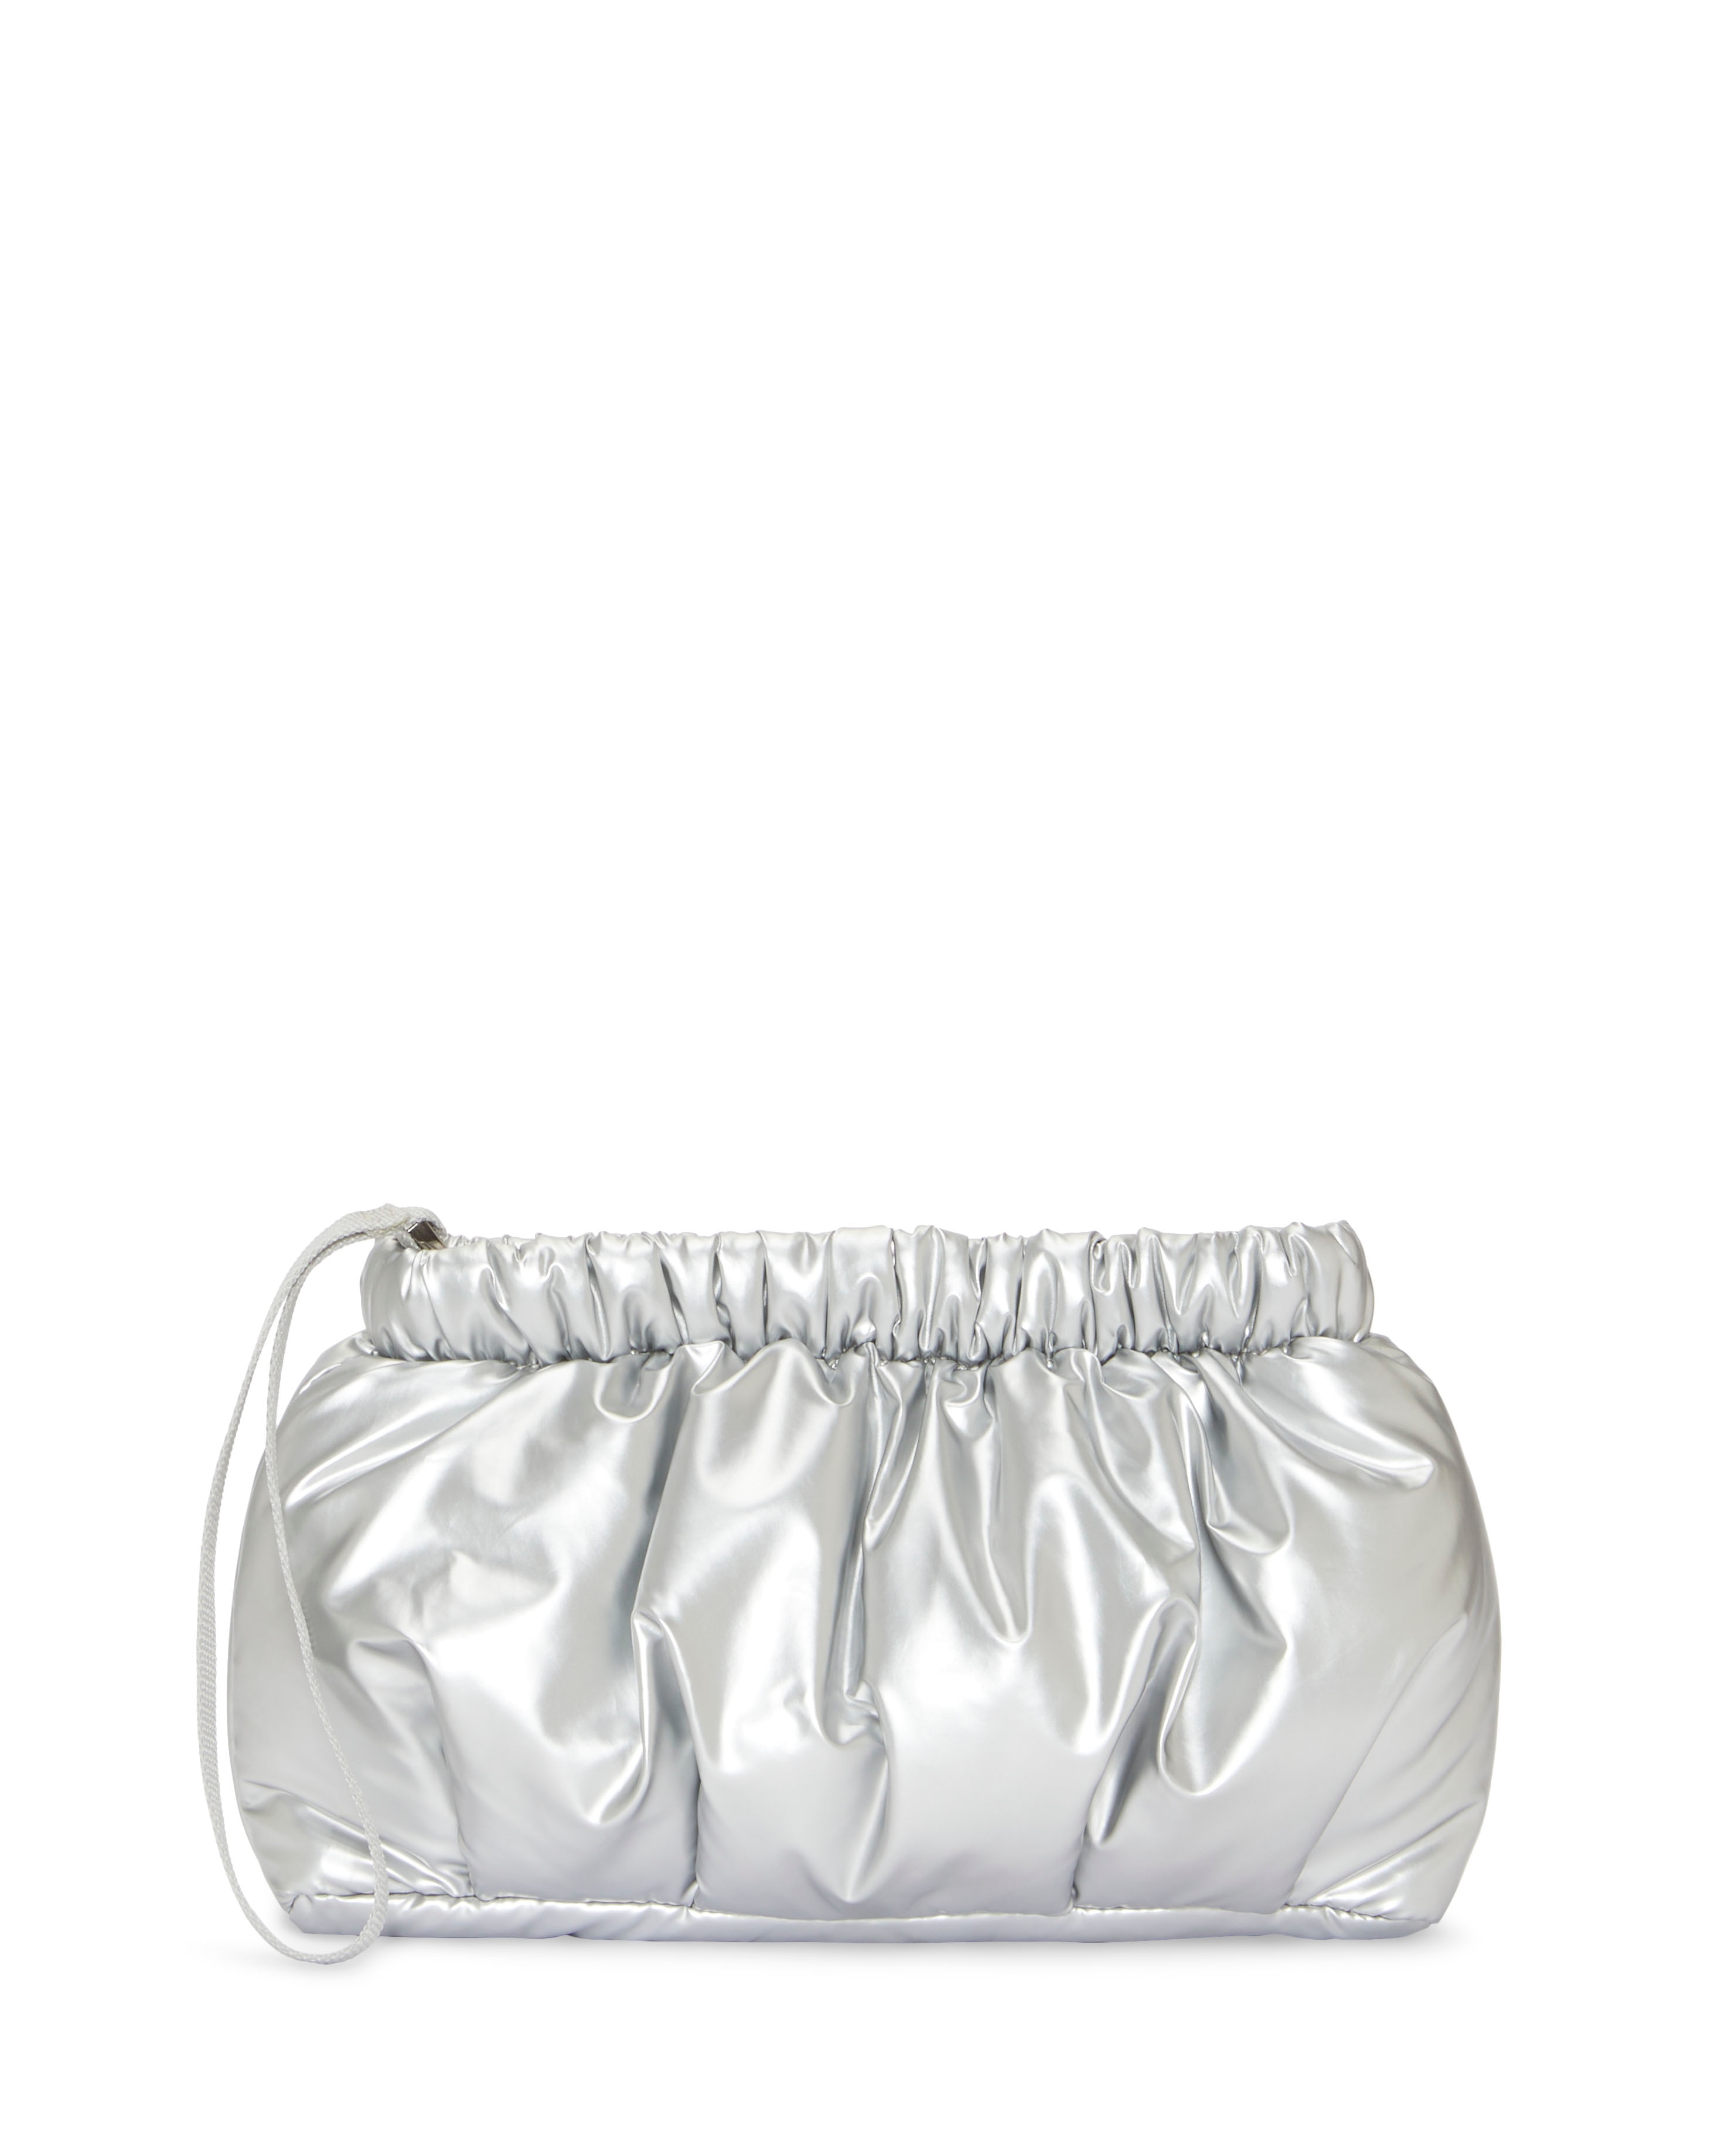 Vince Camuto Harlo Pouch | Vince Camuto